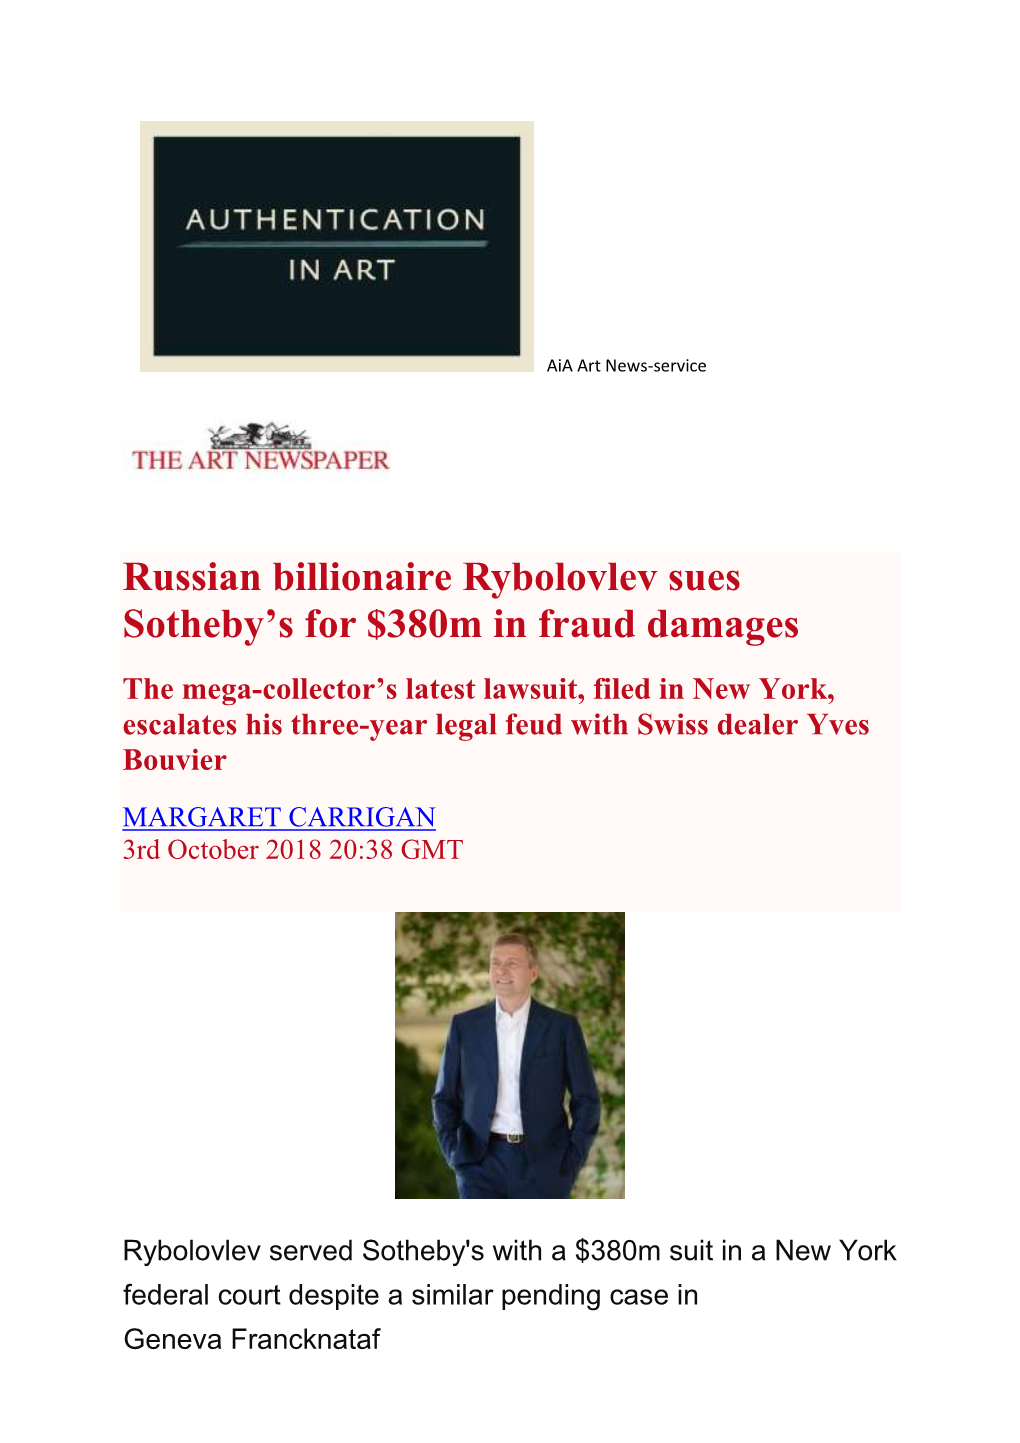 Russian Billionaire Rybolovlev Sues Sotheby's for $380M in Fraud